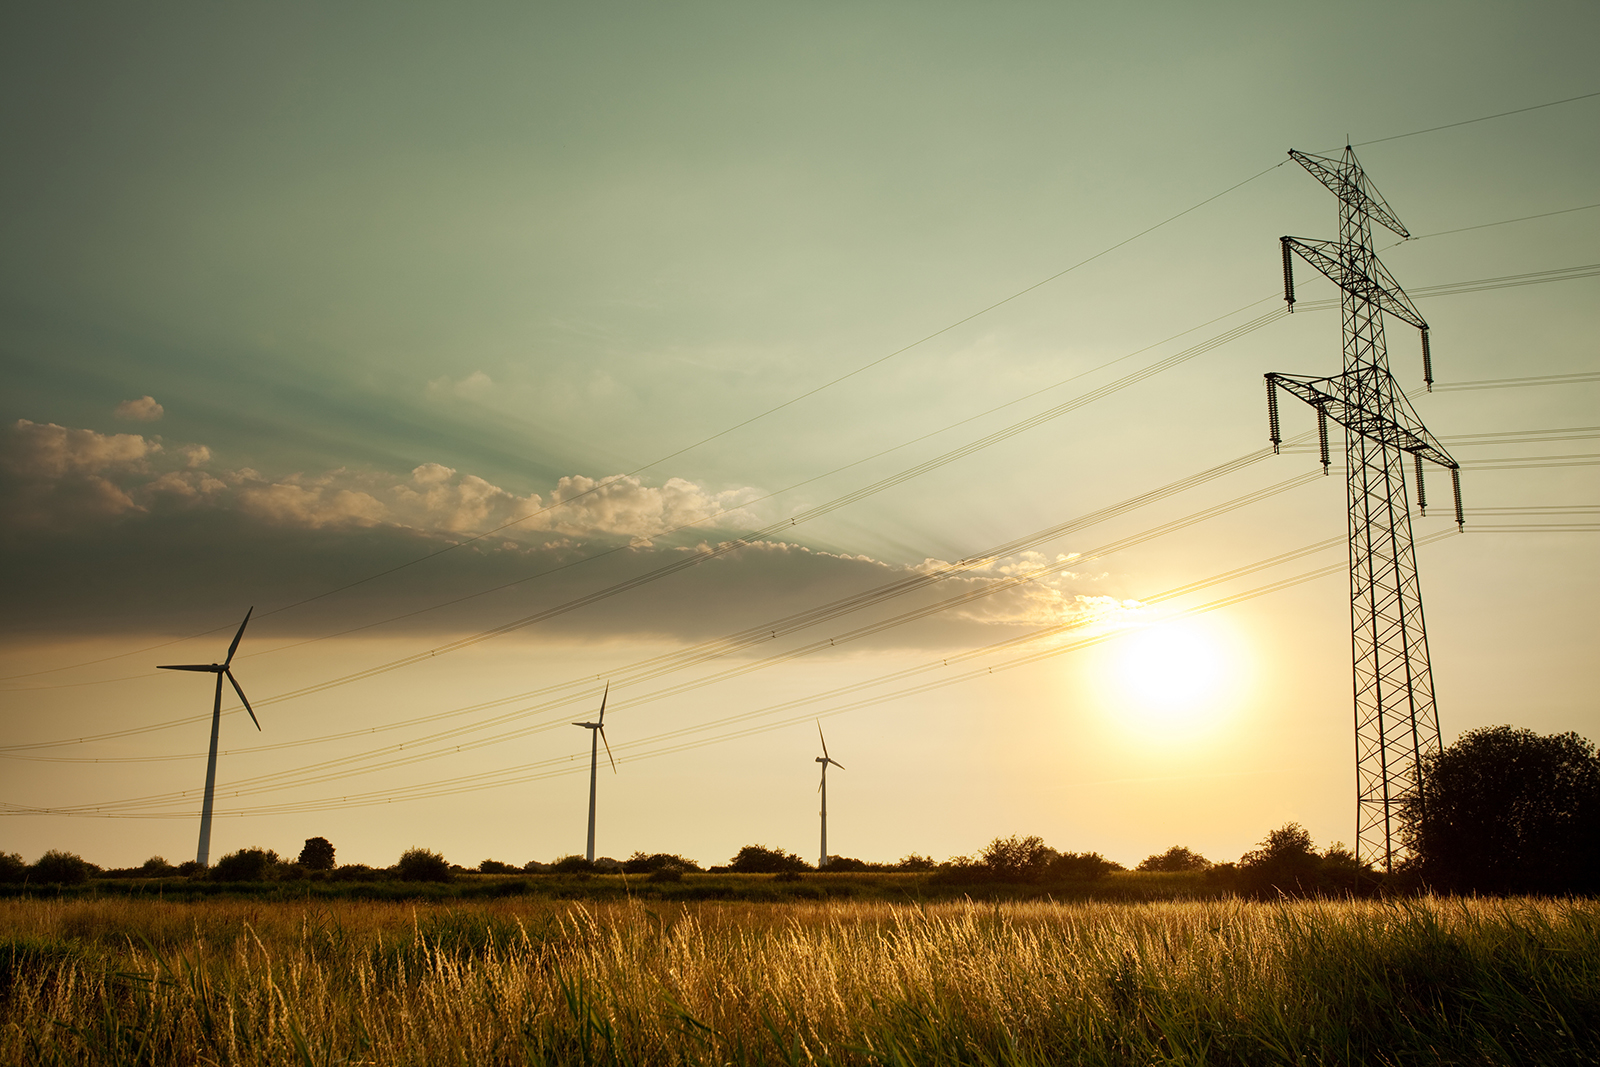 Transmission lines and wind generators